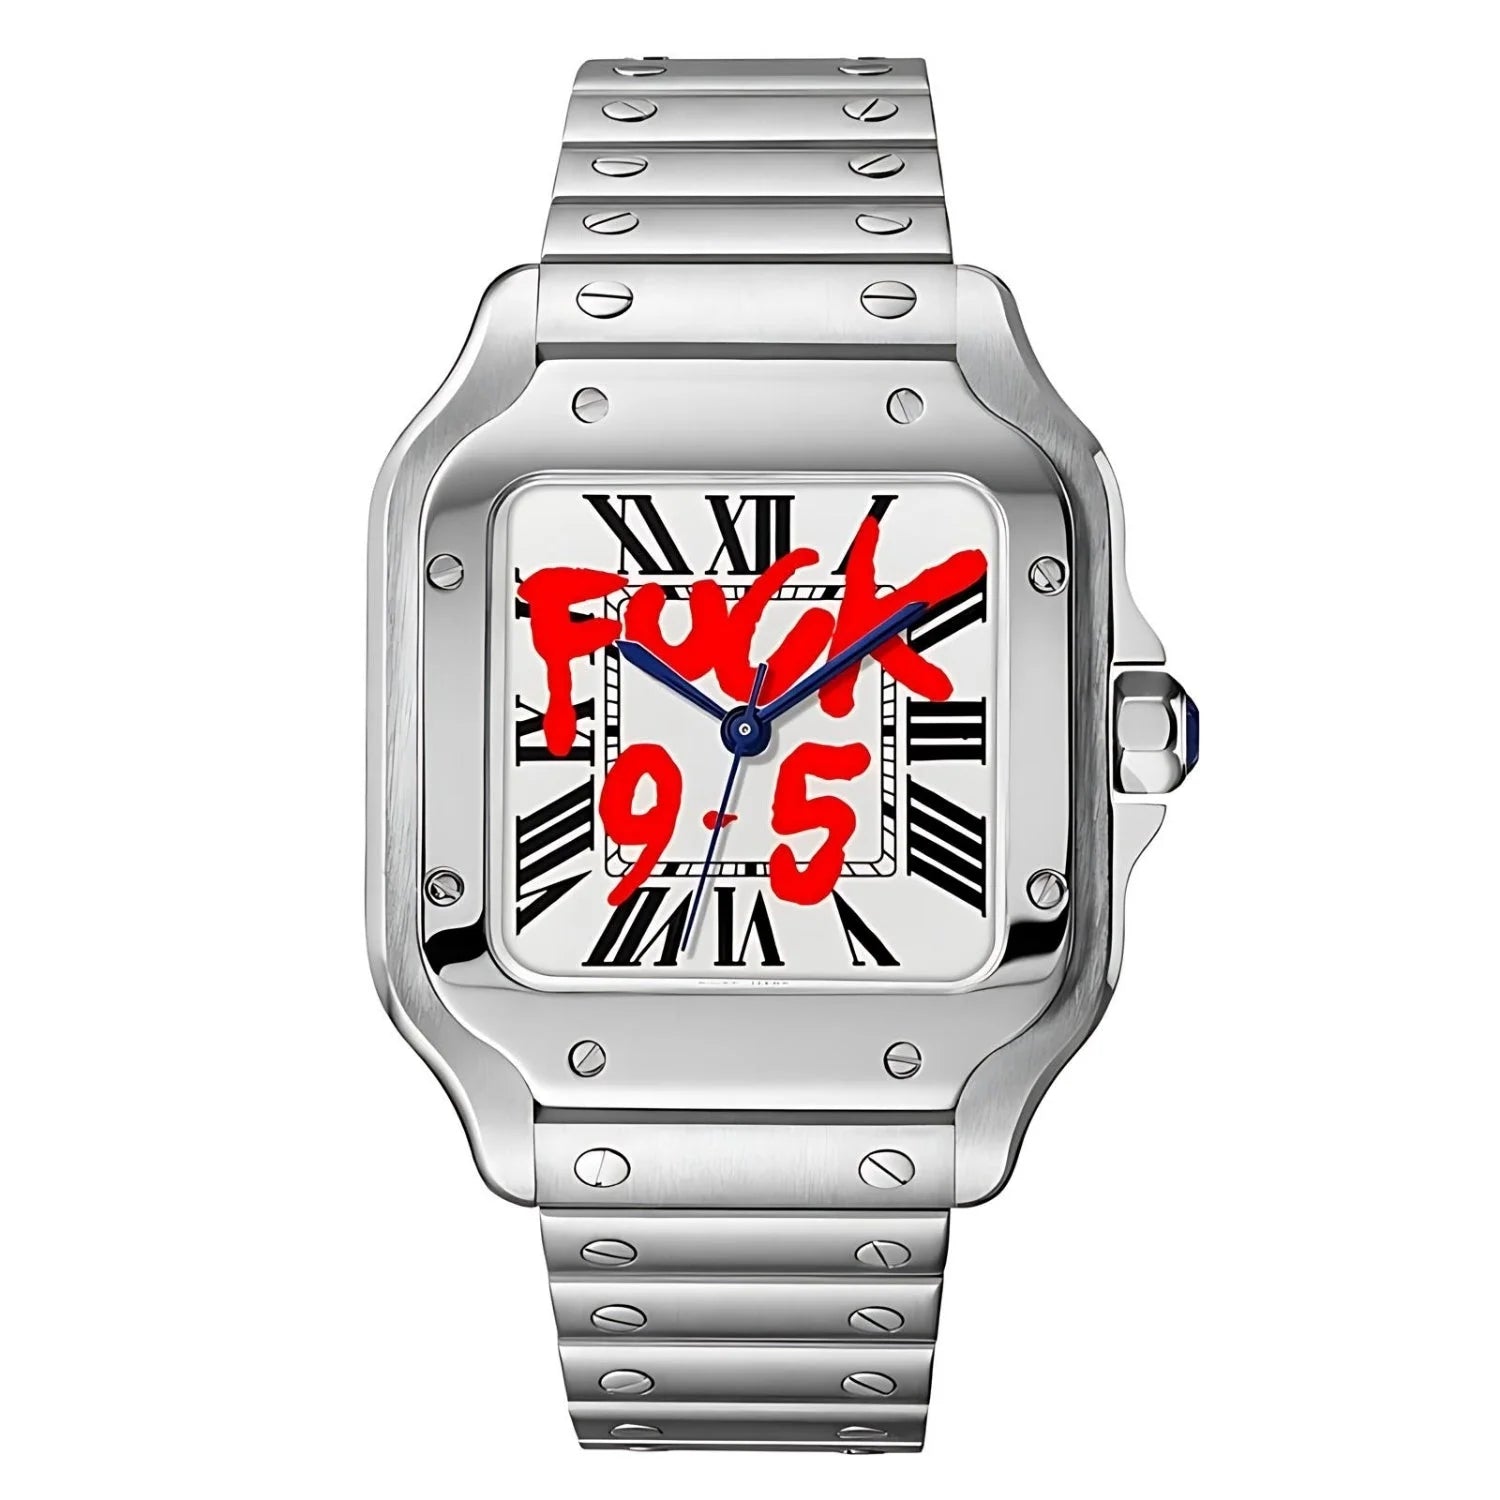 Square-faced Wristwatch With Seiko Nh35 Automatic In 904l Stainless Steel, Red Text ’fuck 9.5’